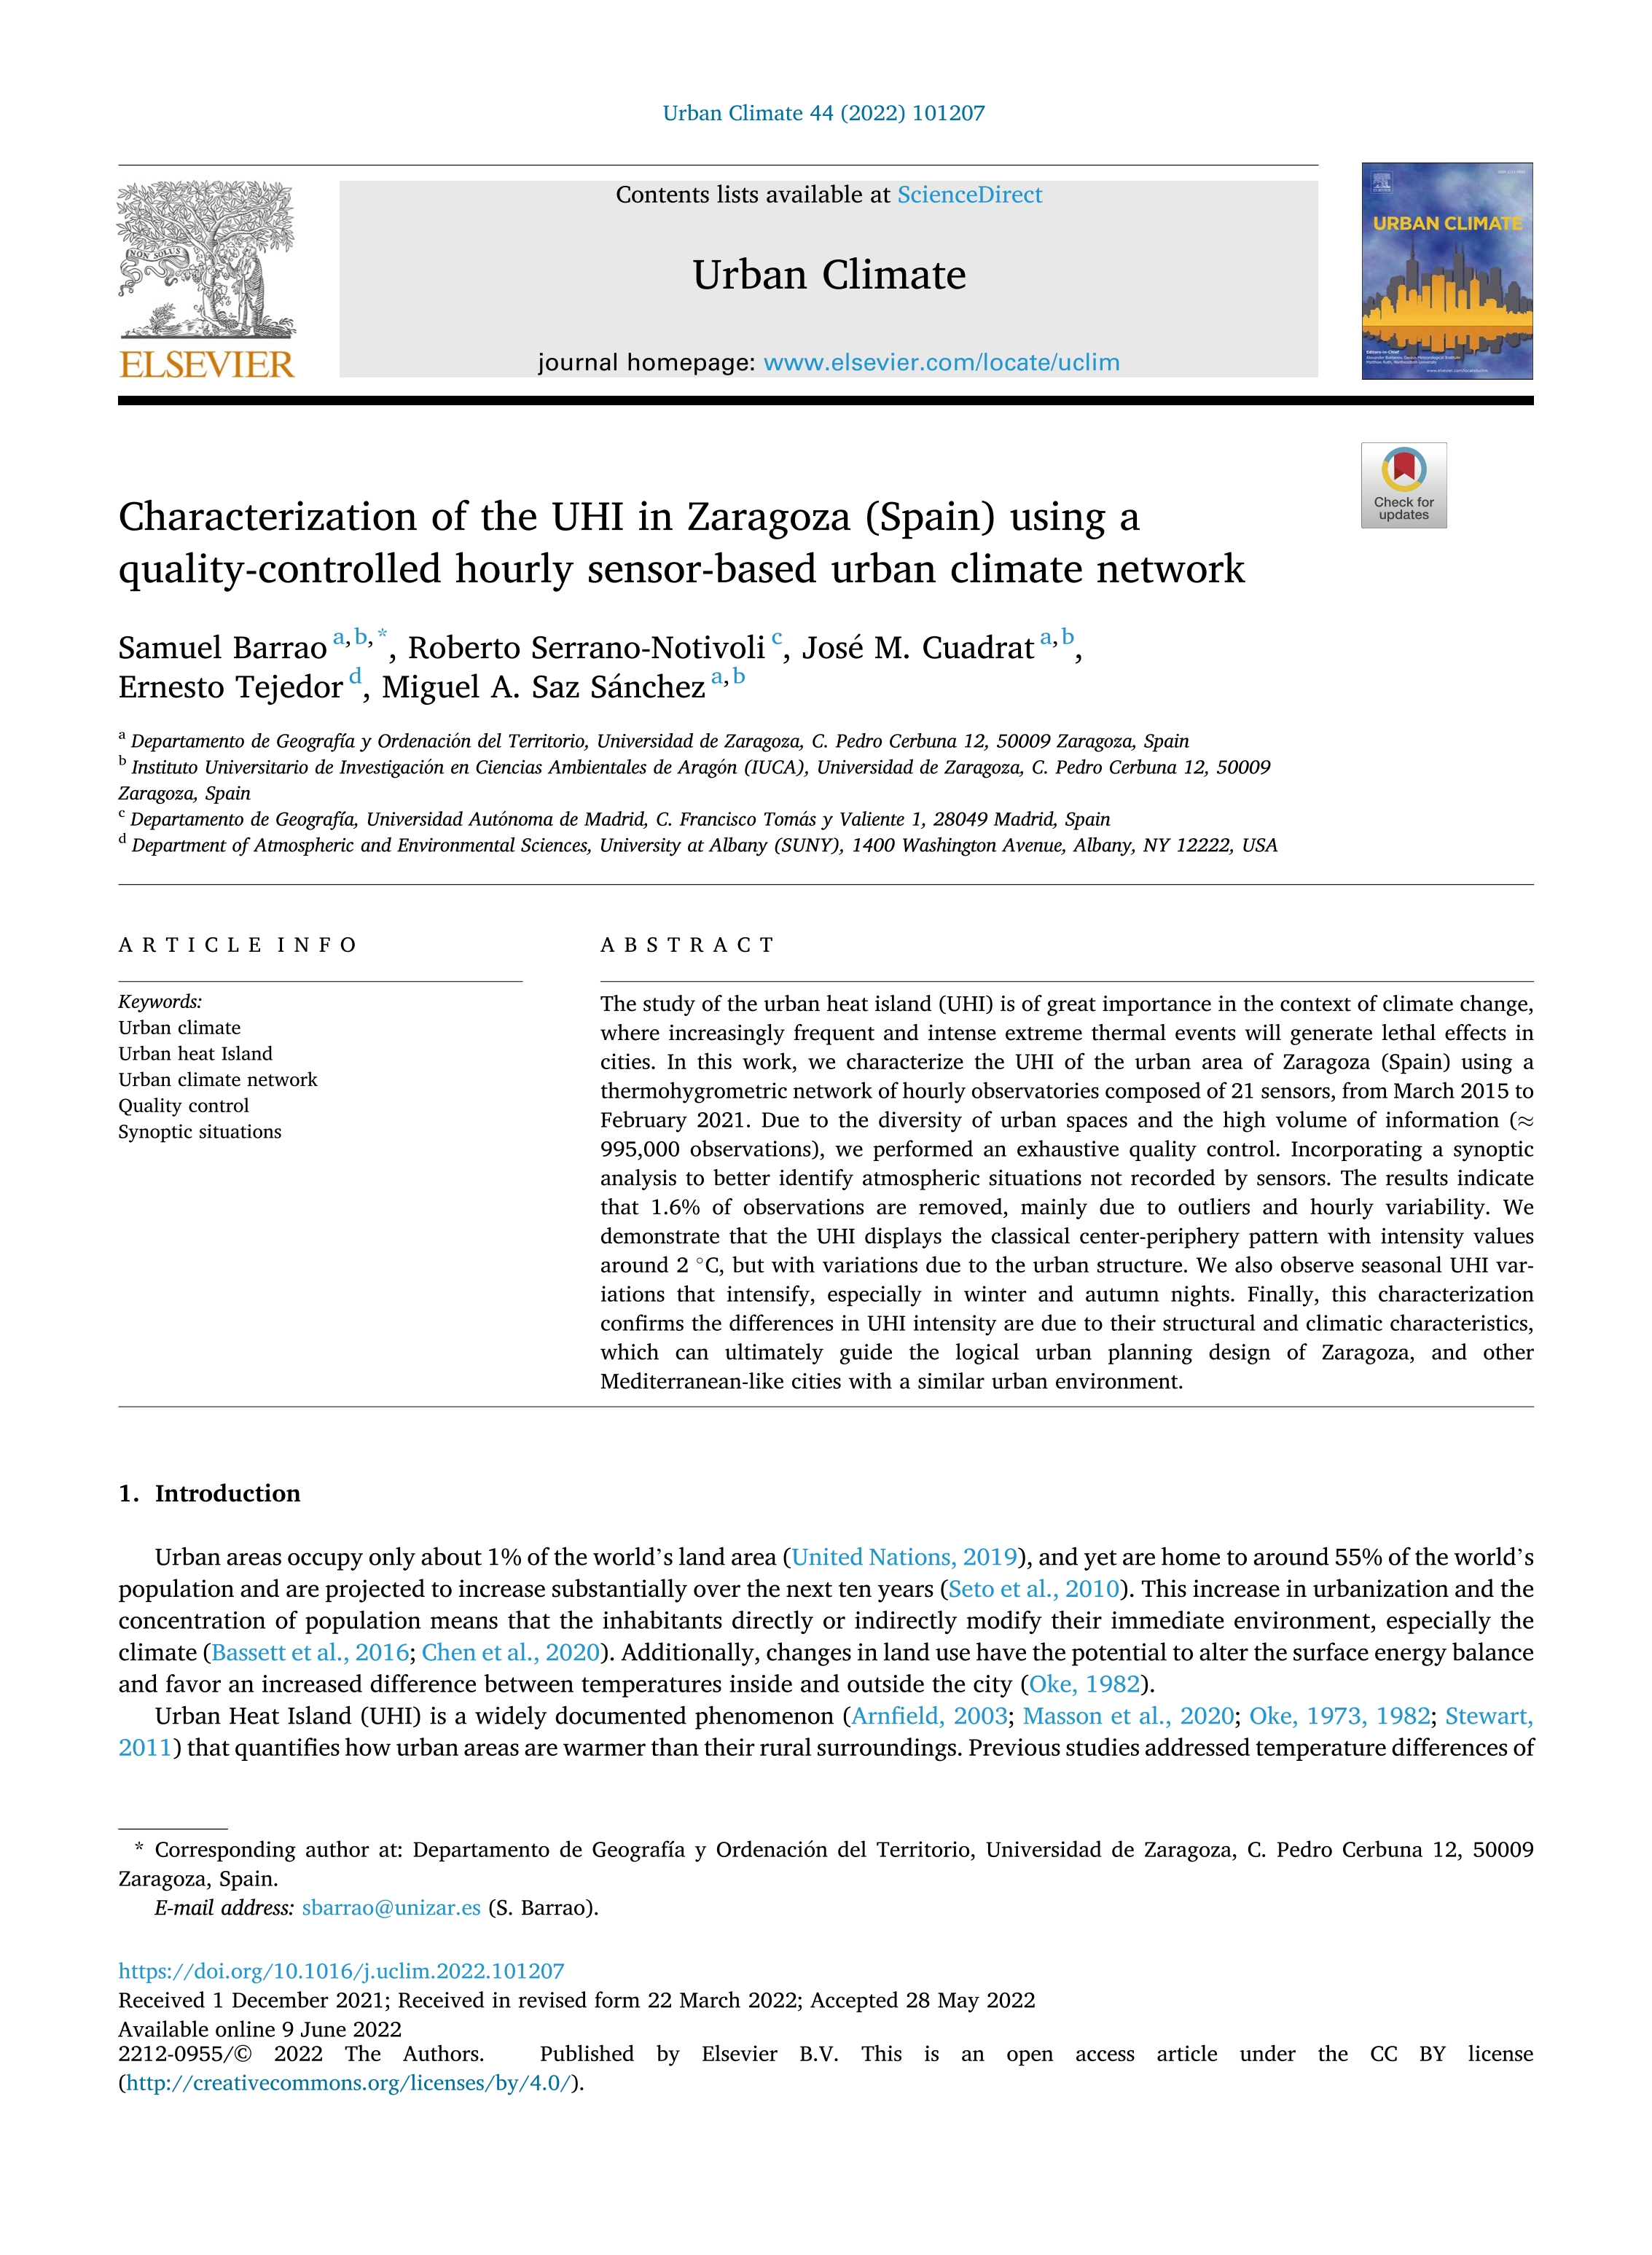 Characterization of the UHI in Zaragoza (Spain) using a quality-controlled hourly sensor-based urban climate network